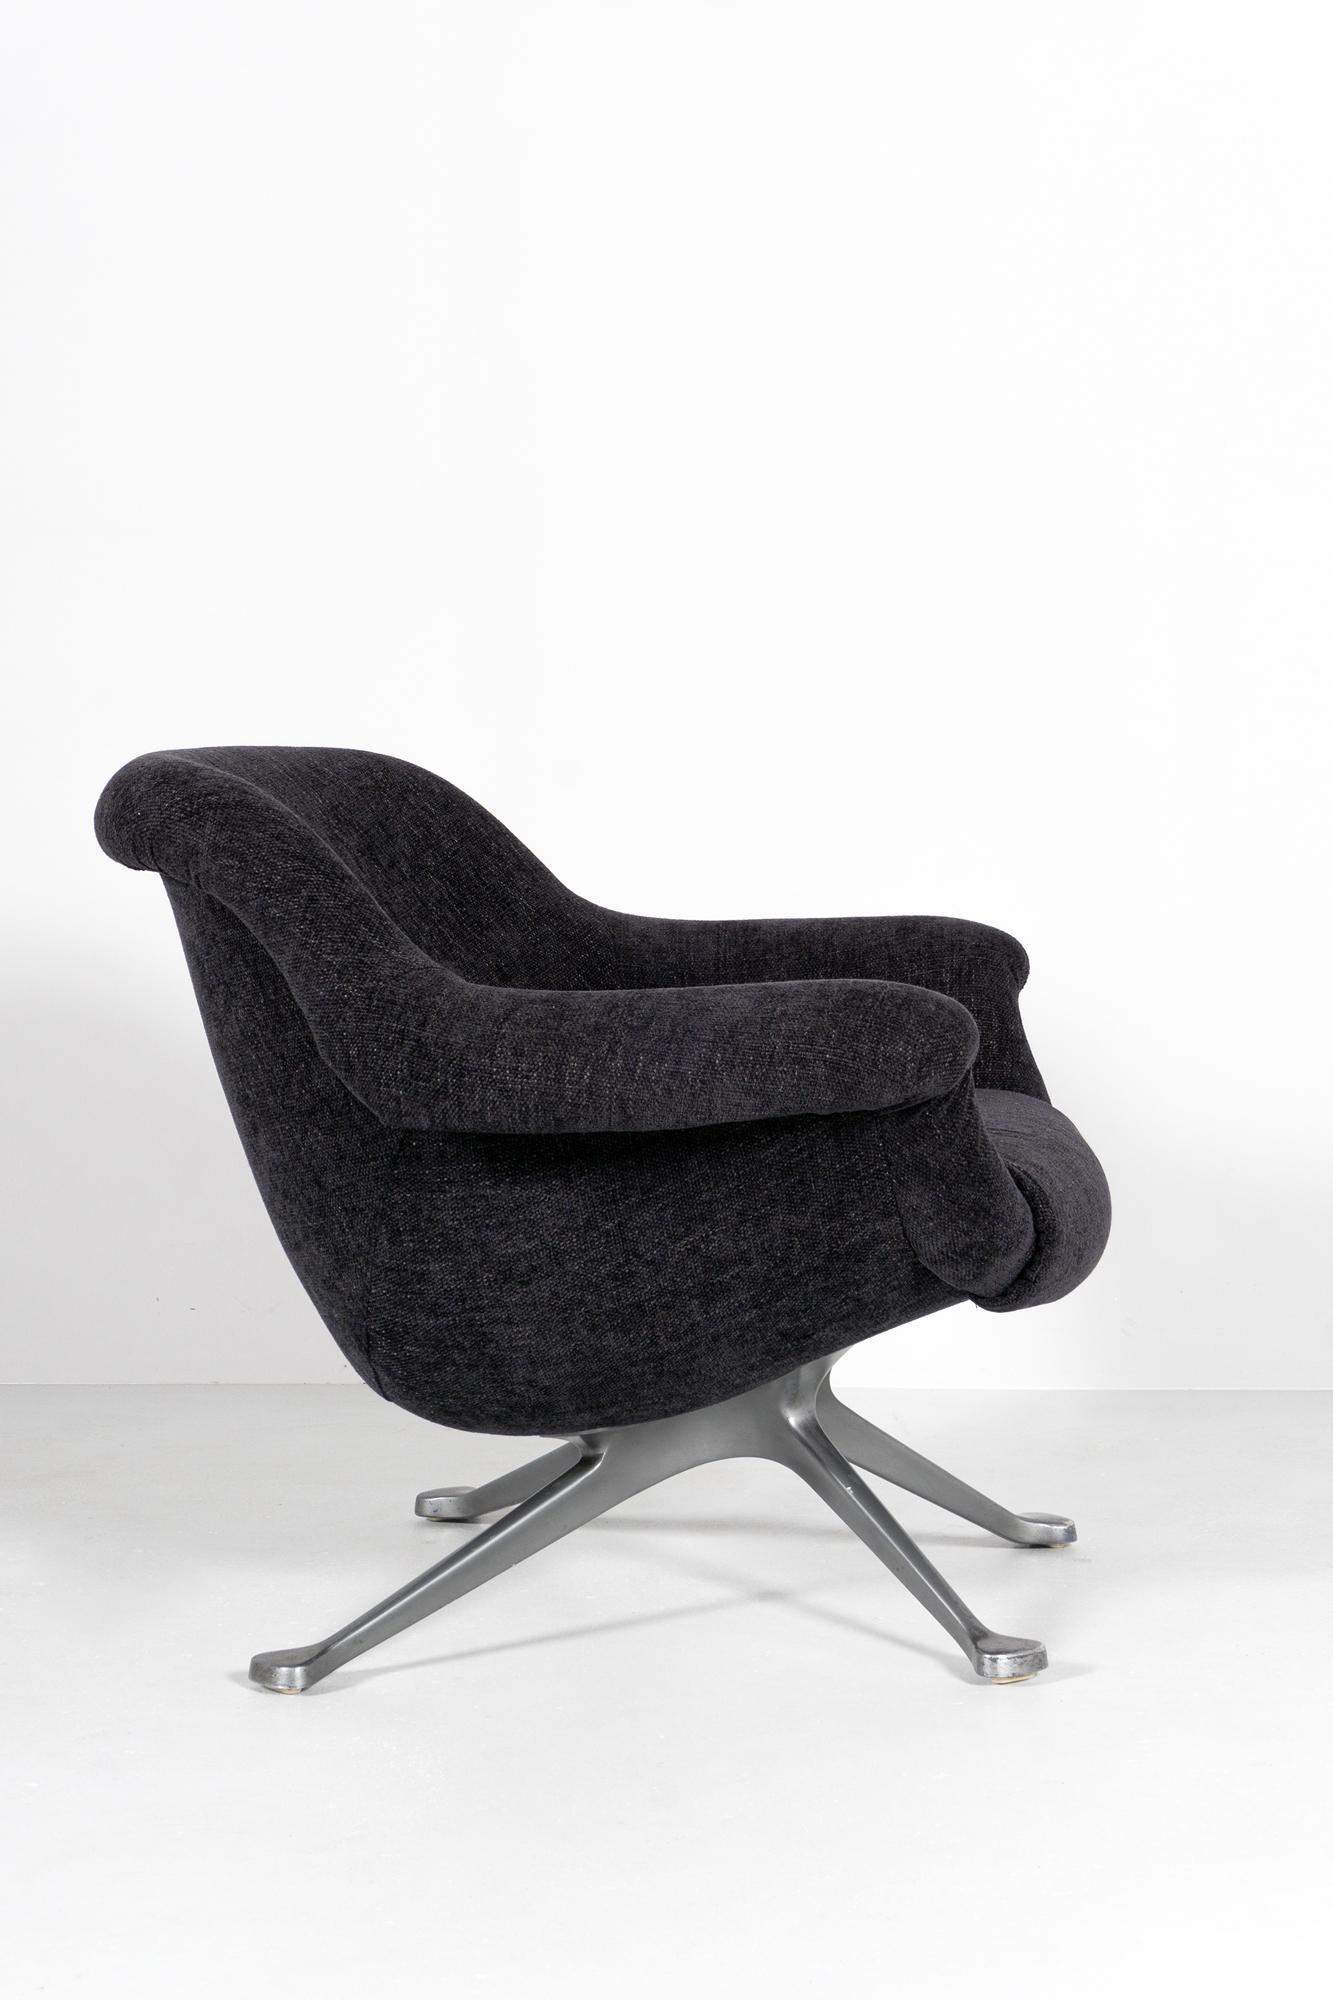 Mid-Century Modern Armchair by Angelo Mangiarotti (Model 1110), Cassina Italy 1964 For Sale